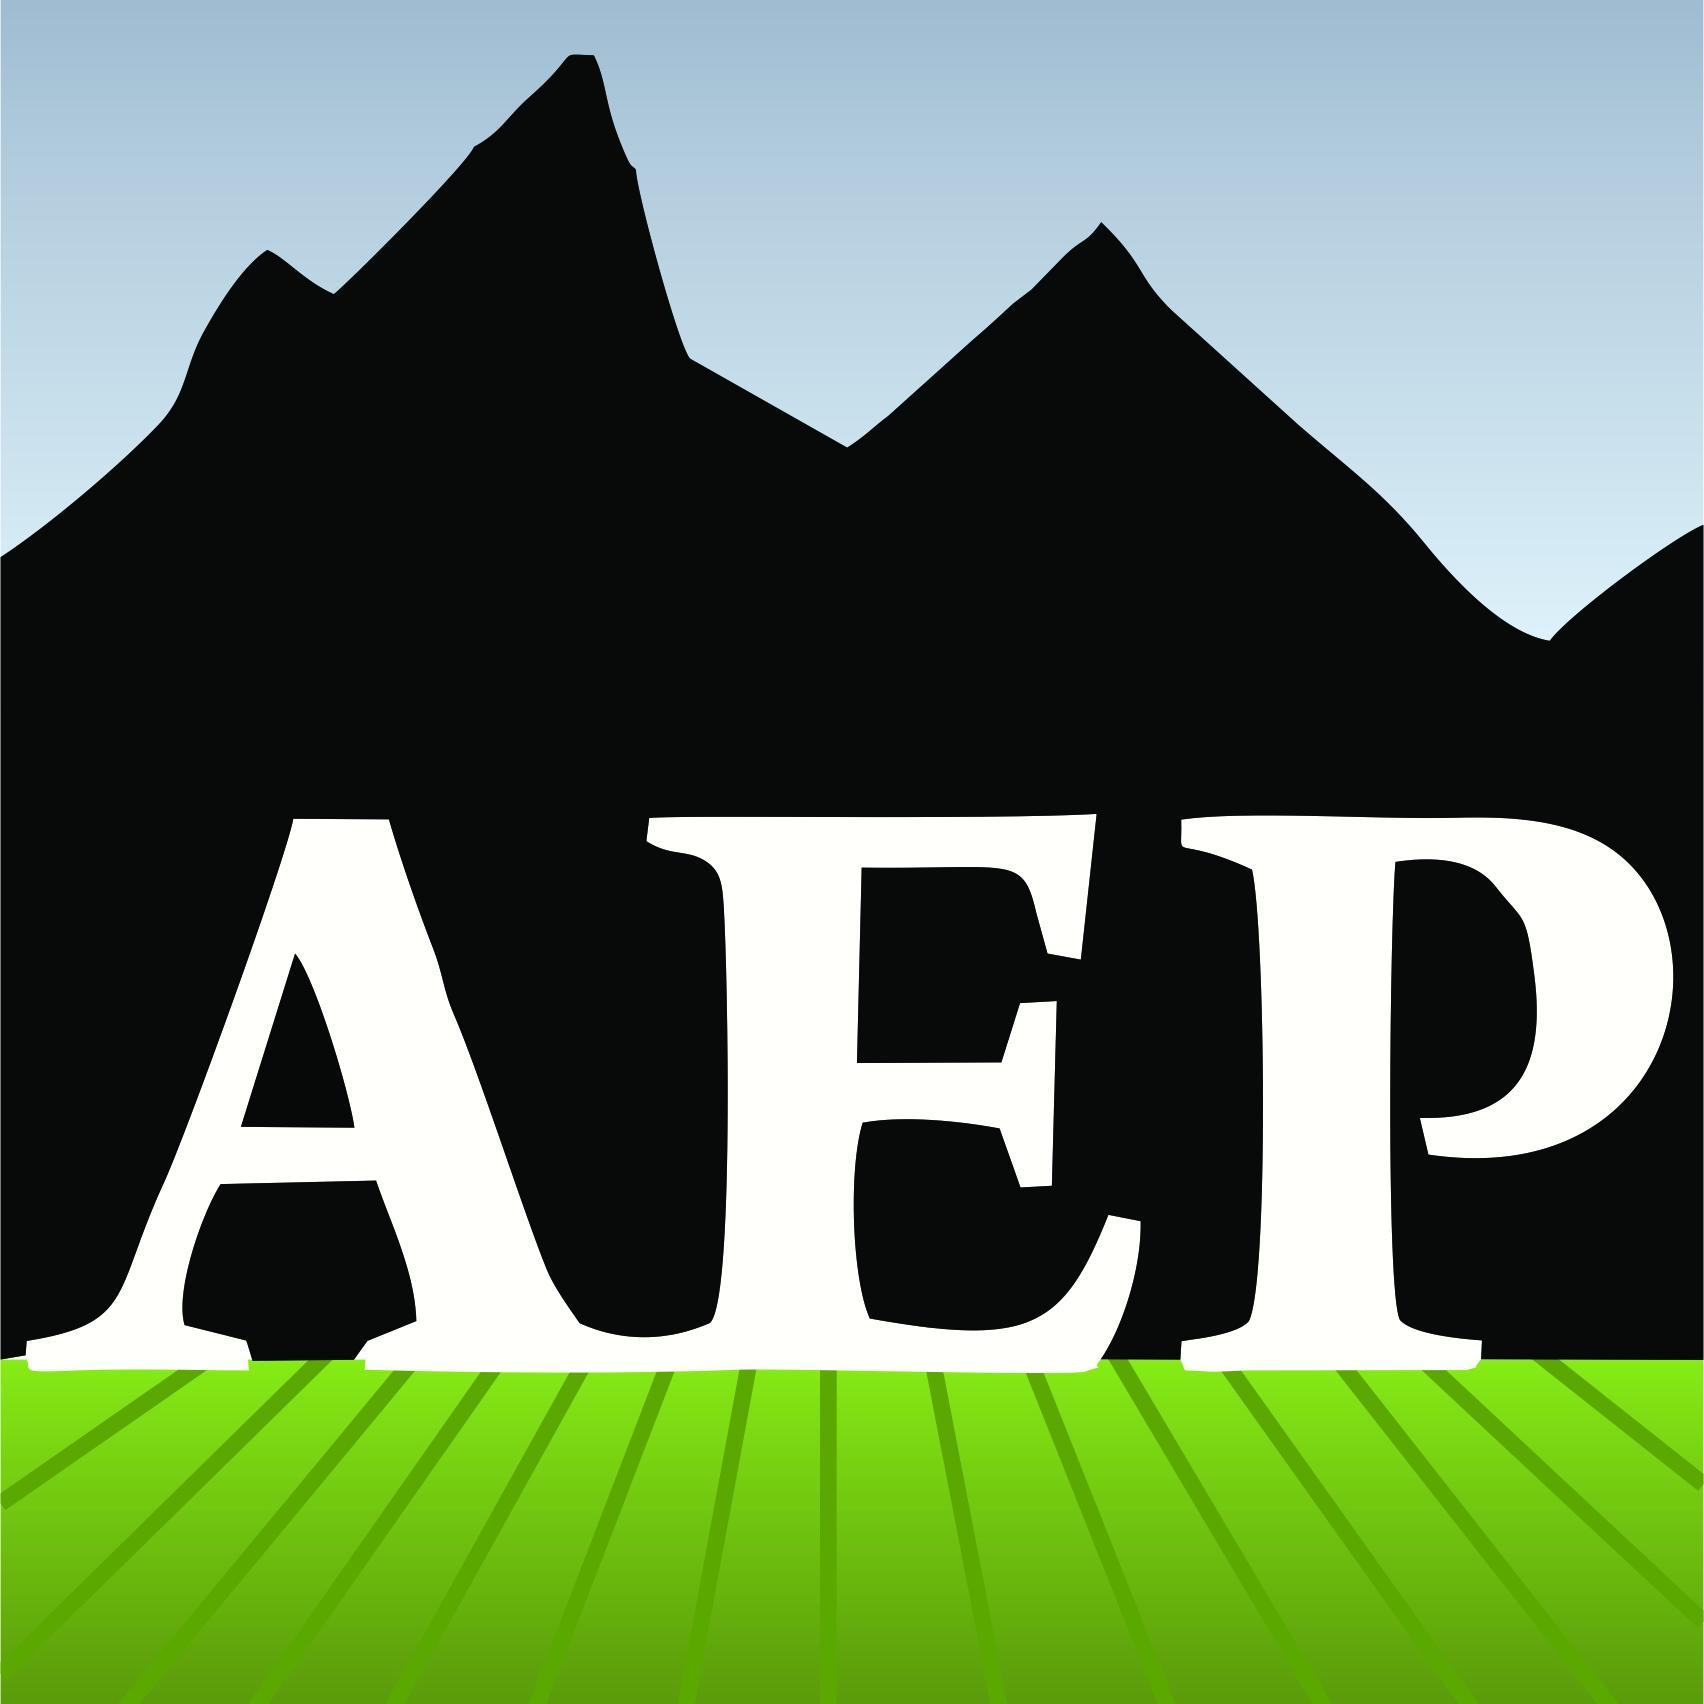 San Diego Chapter of the Association of Environmental Professionals